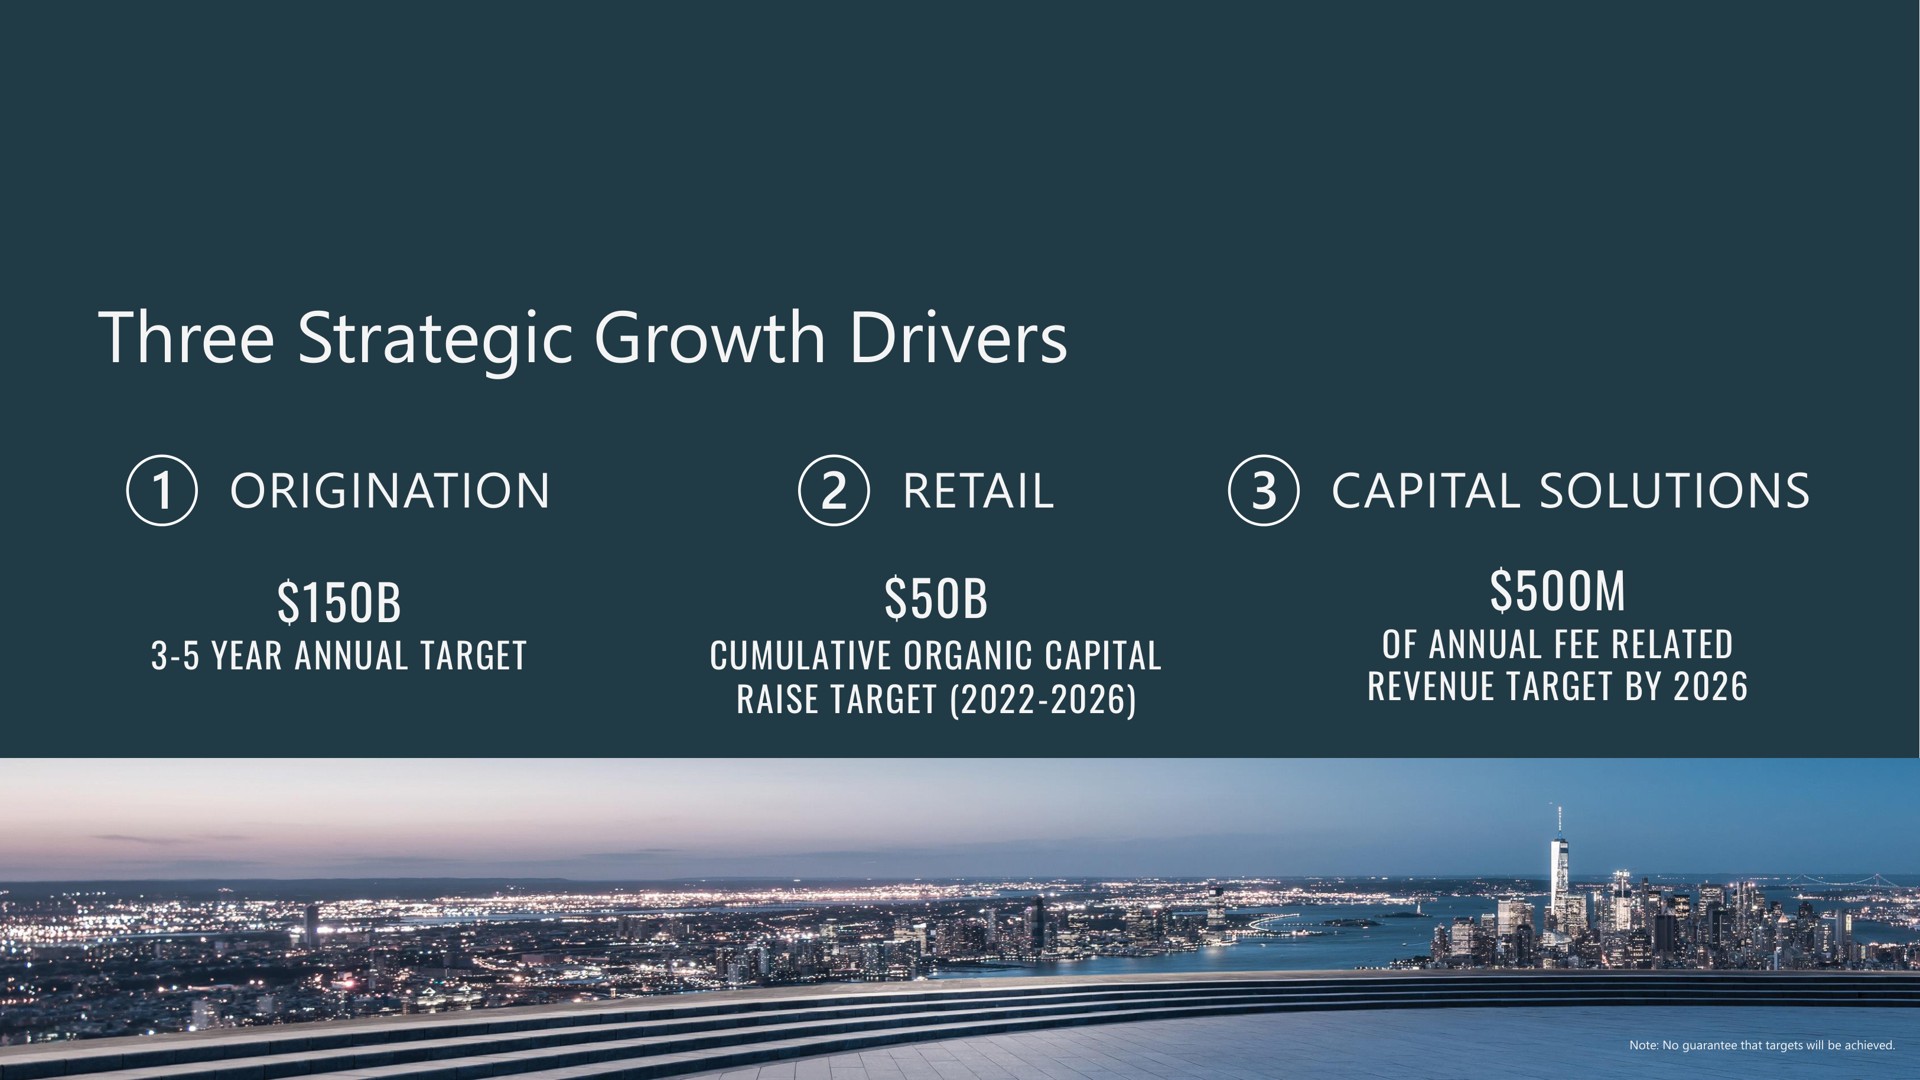 three strategic growth drivers origination retail capital solutions year annual target cumulative organic capital raise target of annual fee related revenue target by cee slot | Apollo Global Management